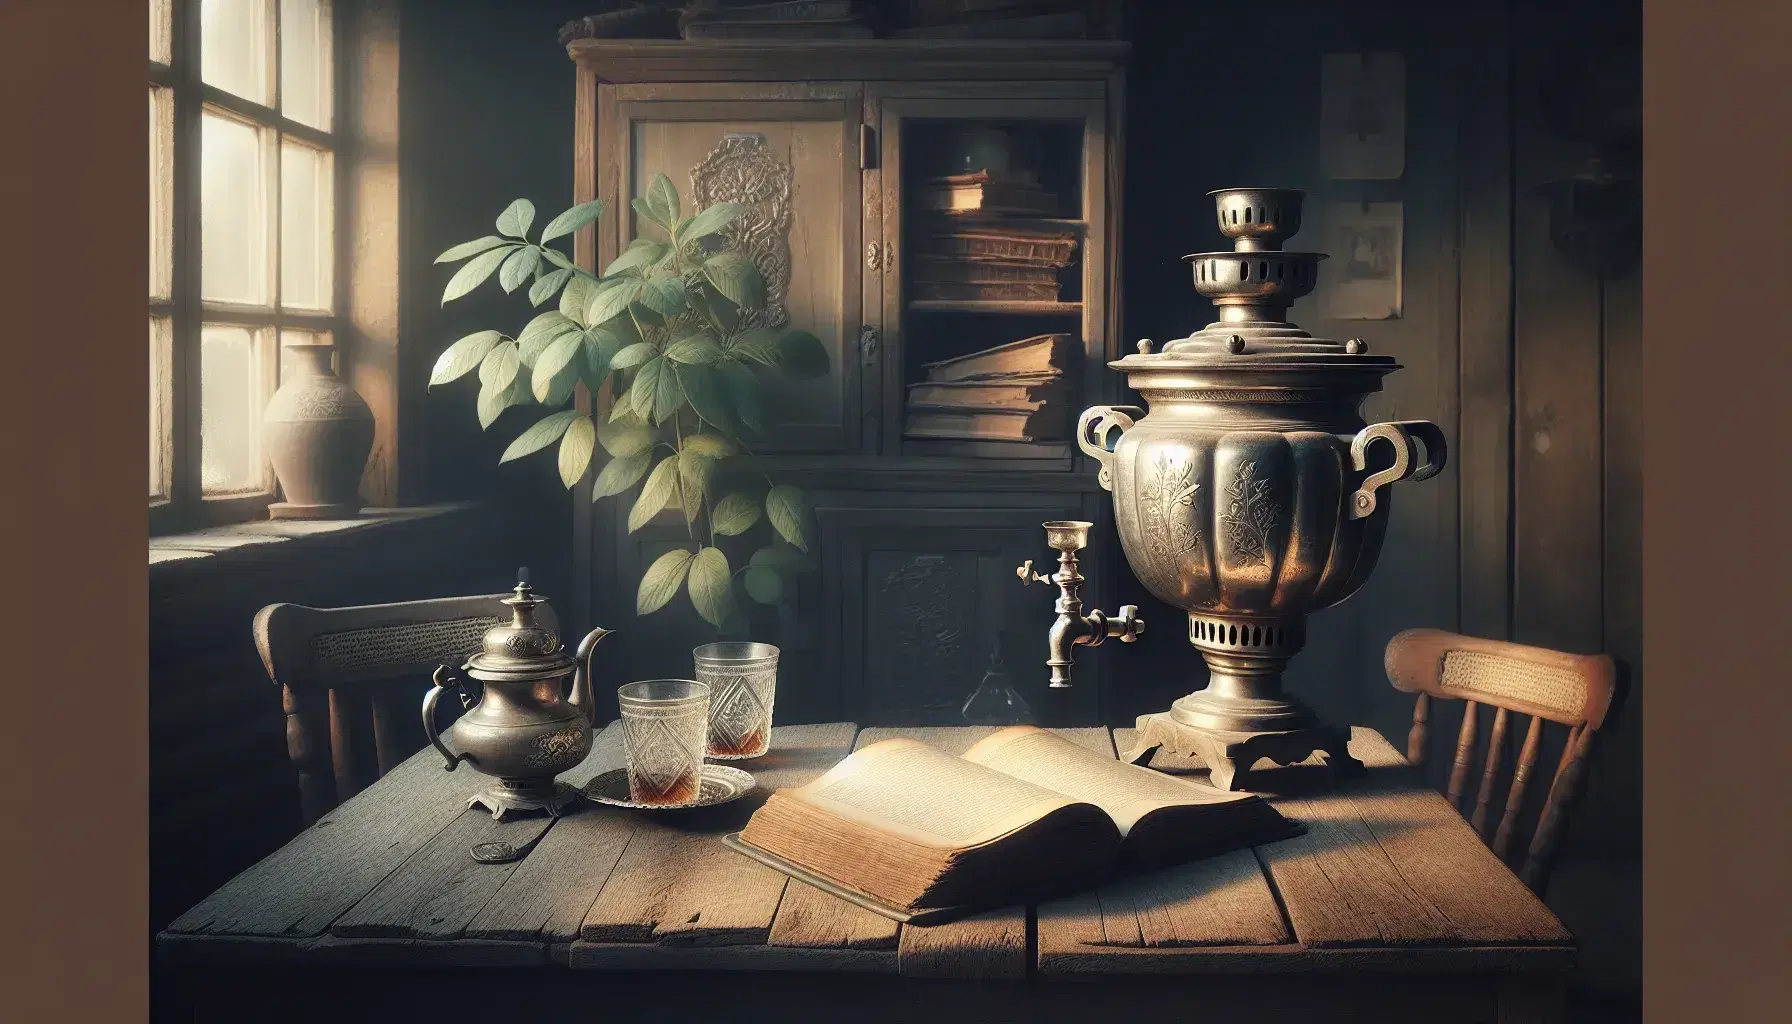 Rustic wooden table with an antique floral-patterned samovar, traditional Russian tea glasses in holders, a potted plant, and an open book on a chair.